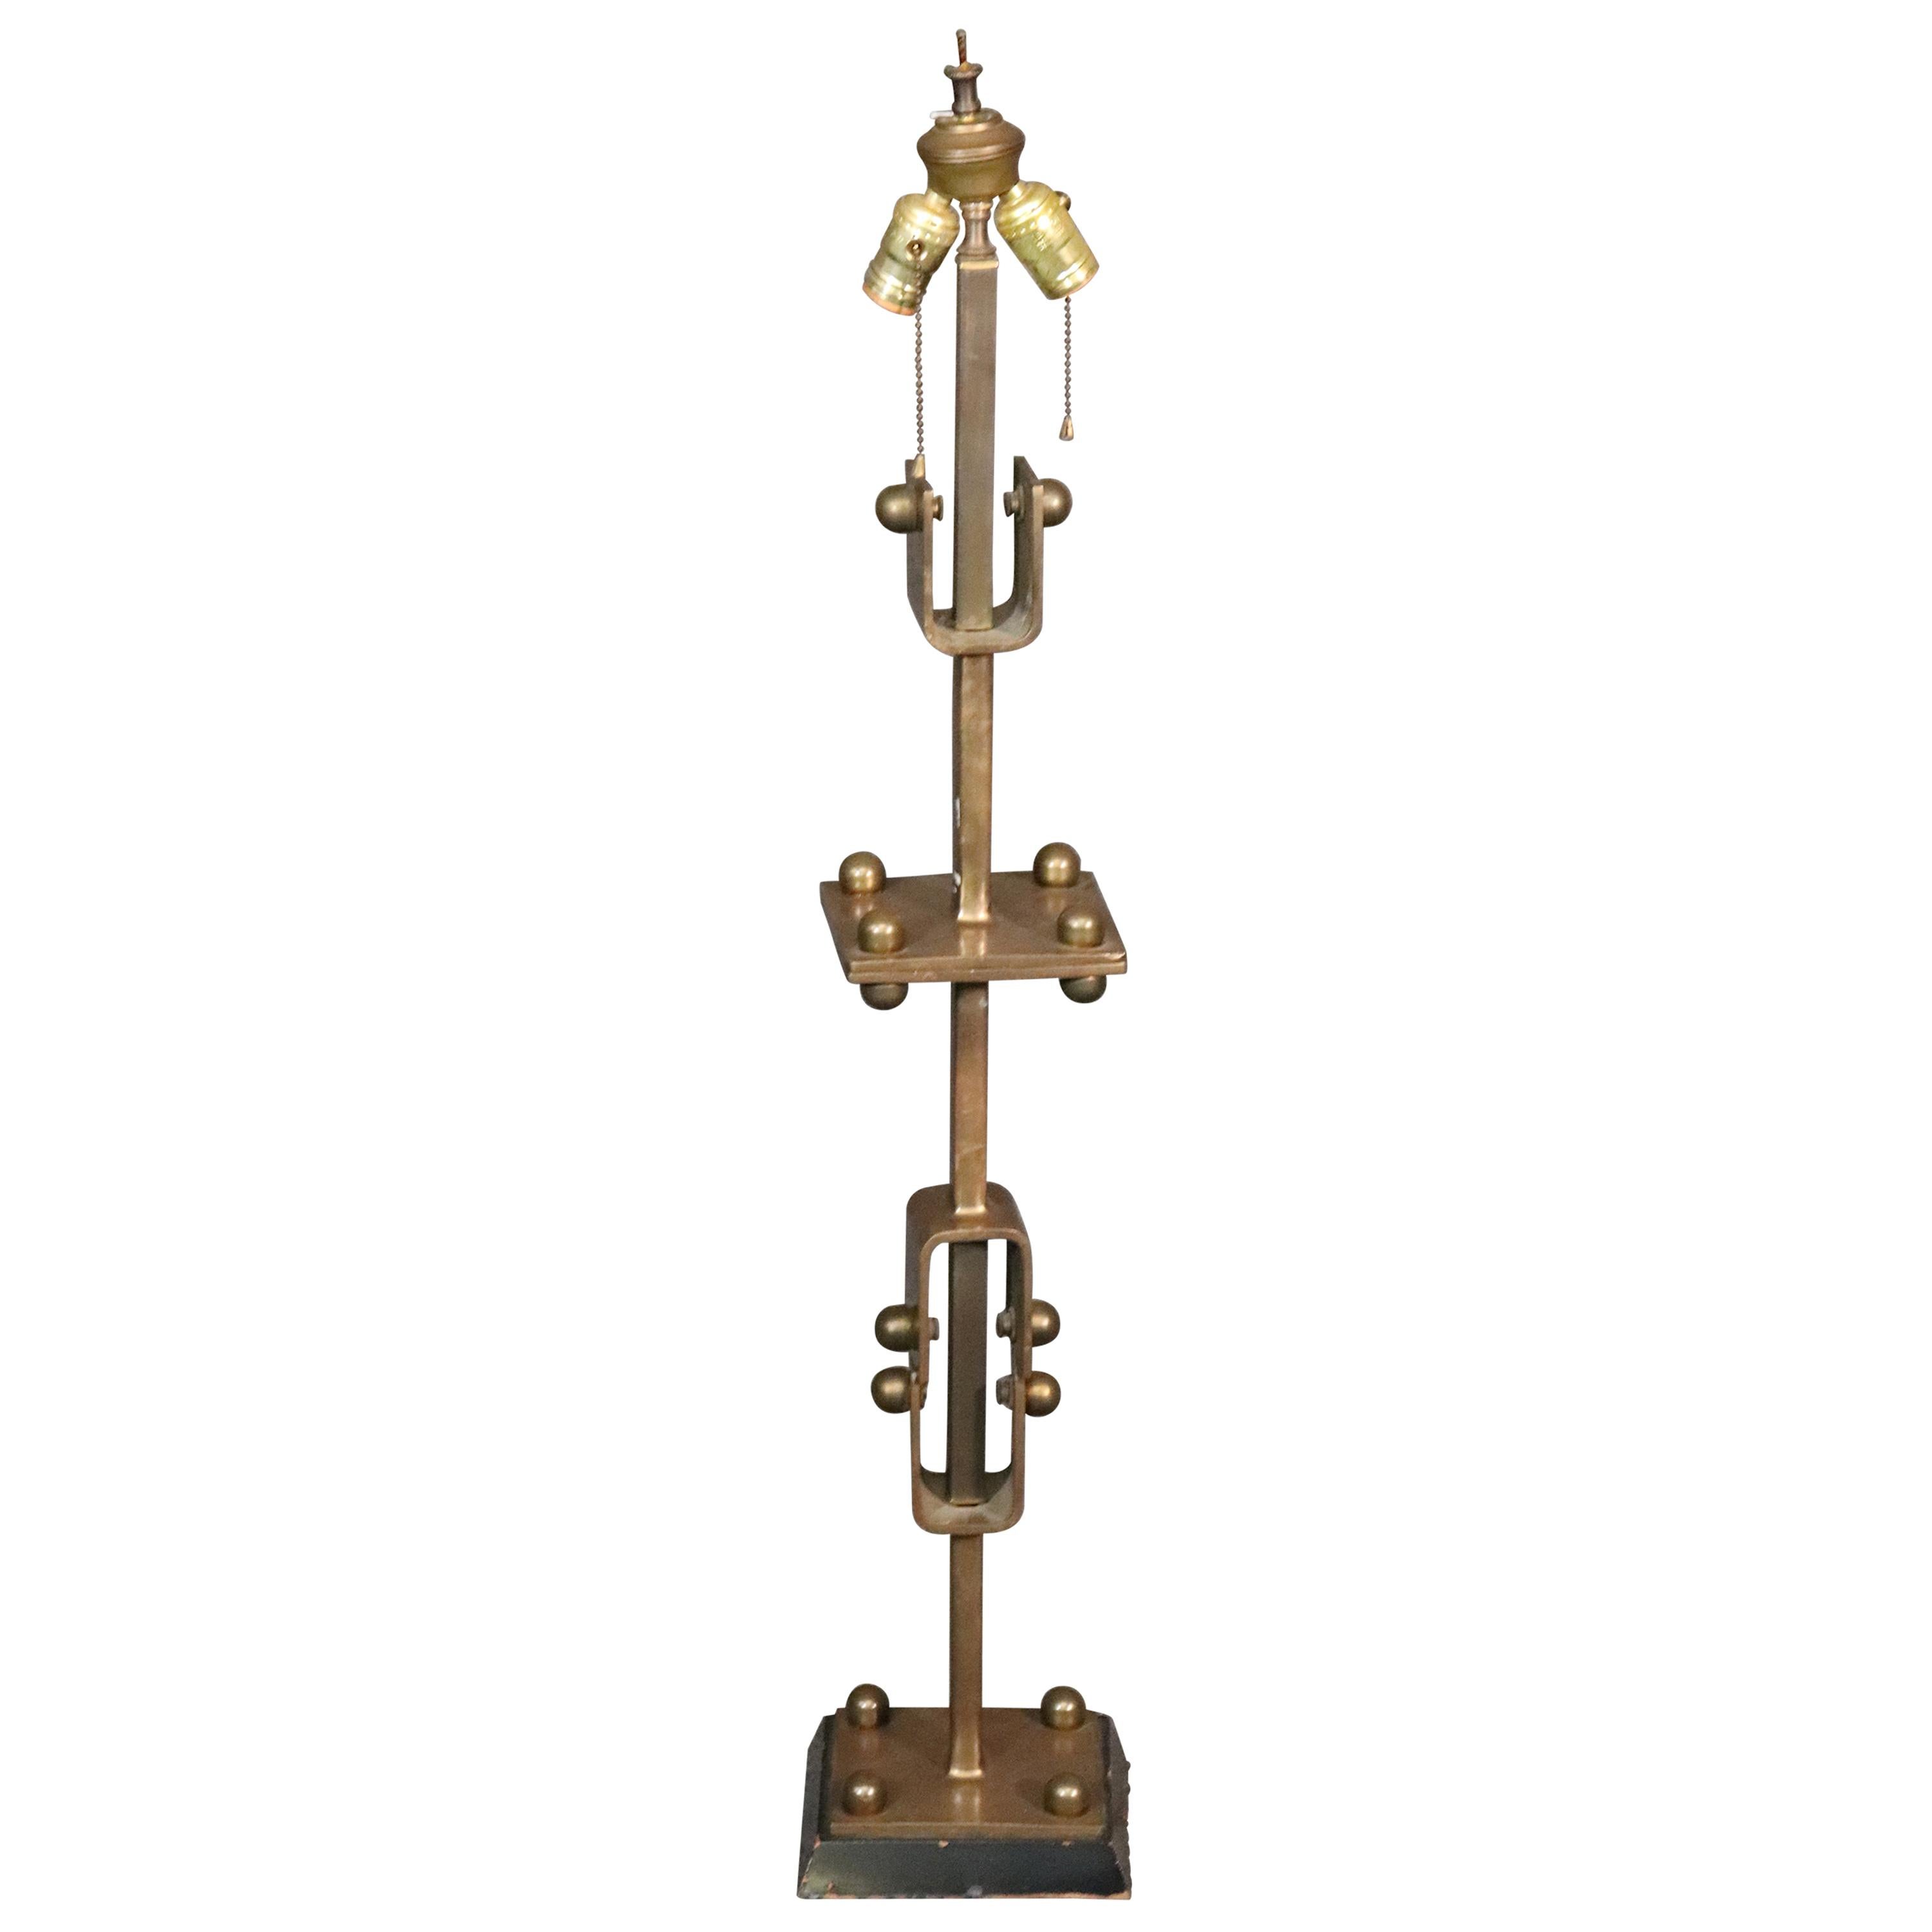 Solid Brass Industrial Studio-Made Art Table Lamp, circa 1950